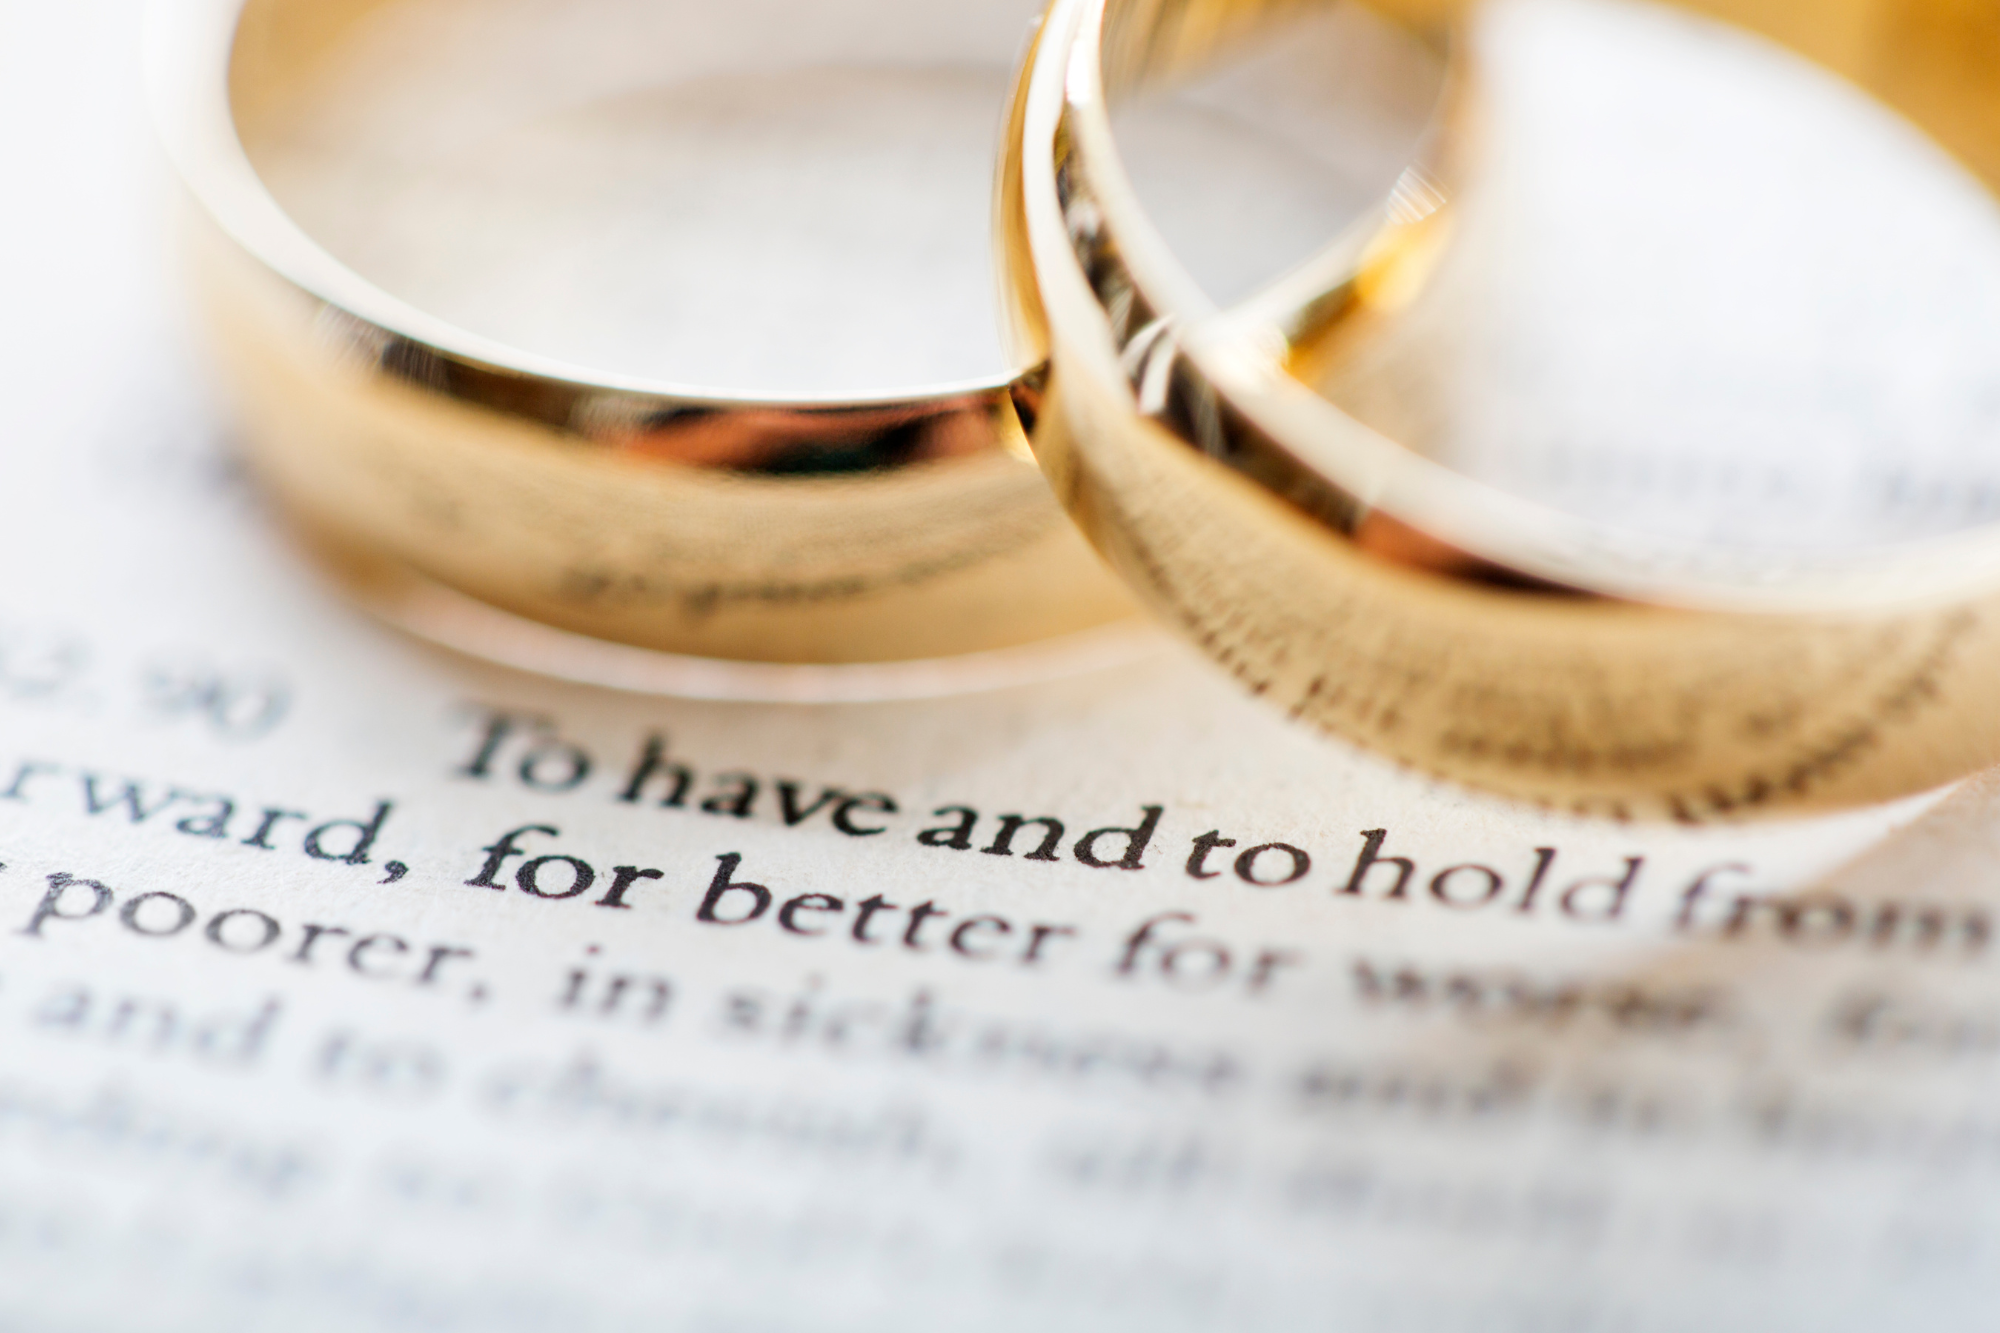 Two gold wedding bands lying upon each other upon printed wedding vows. Eight reasonswhy infidelity is so common.